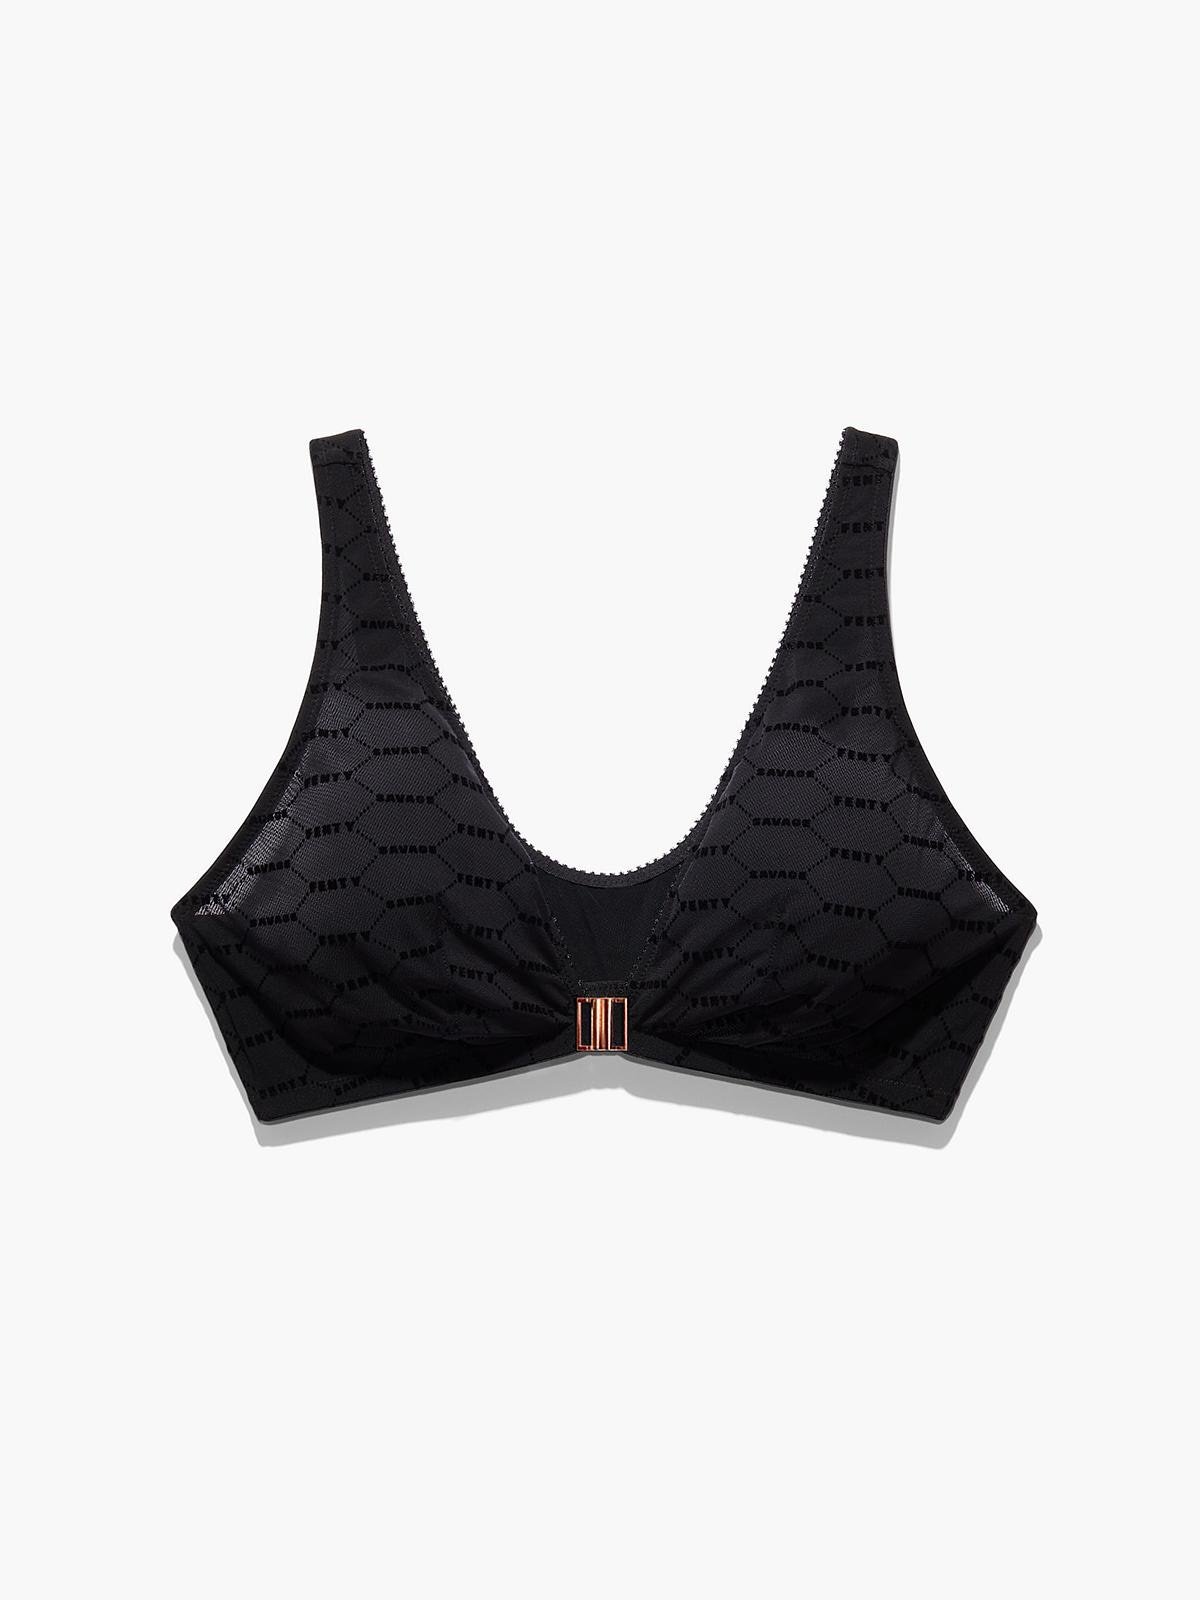 Savage X Fenty Sheer Bralette Size M - $20 (33% Off Retail) - From natalie